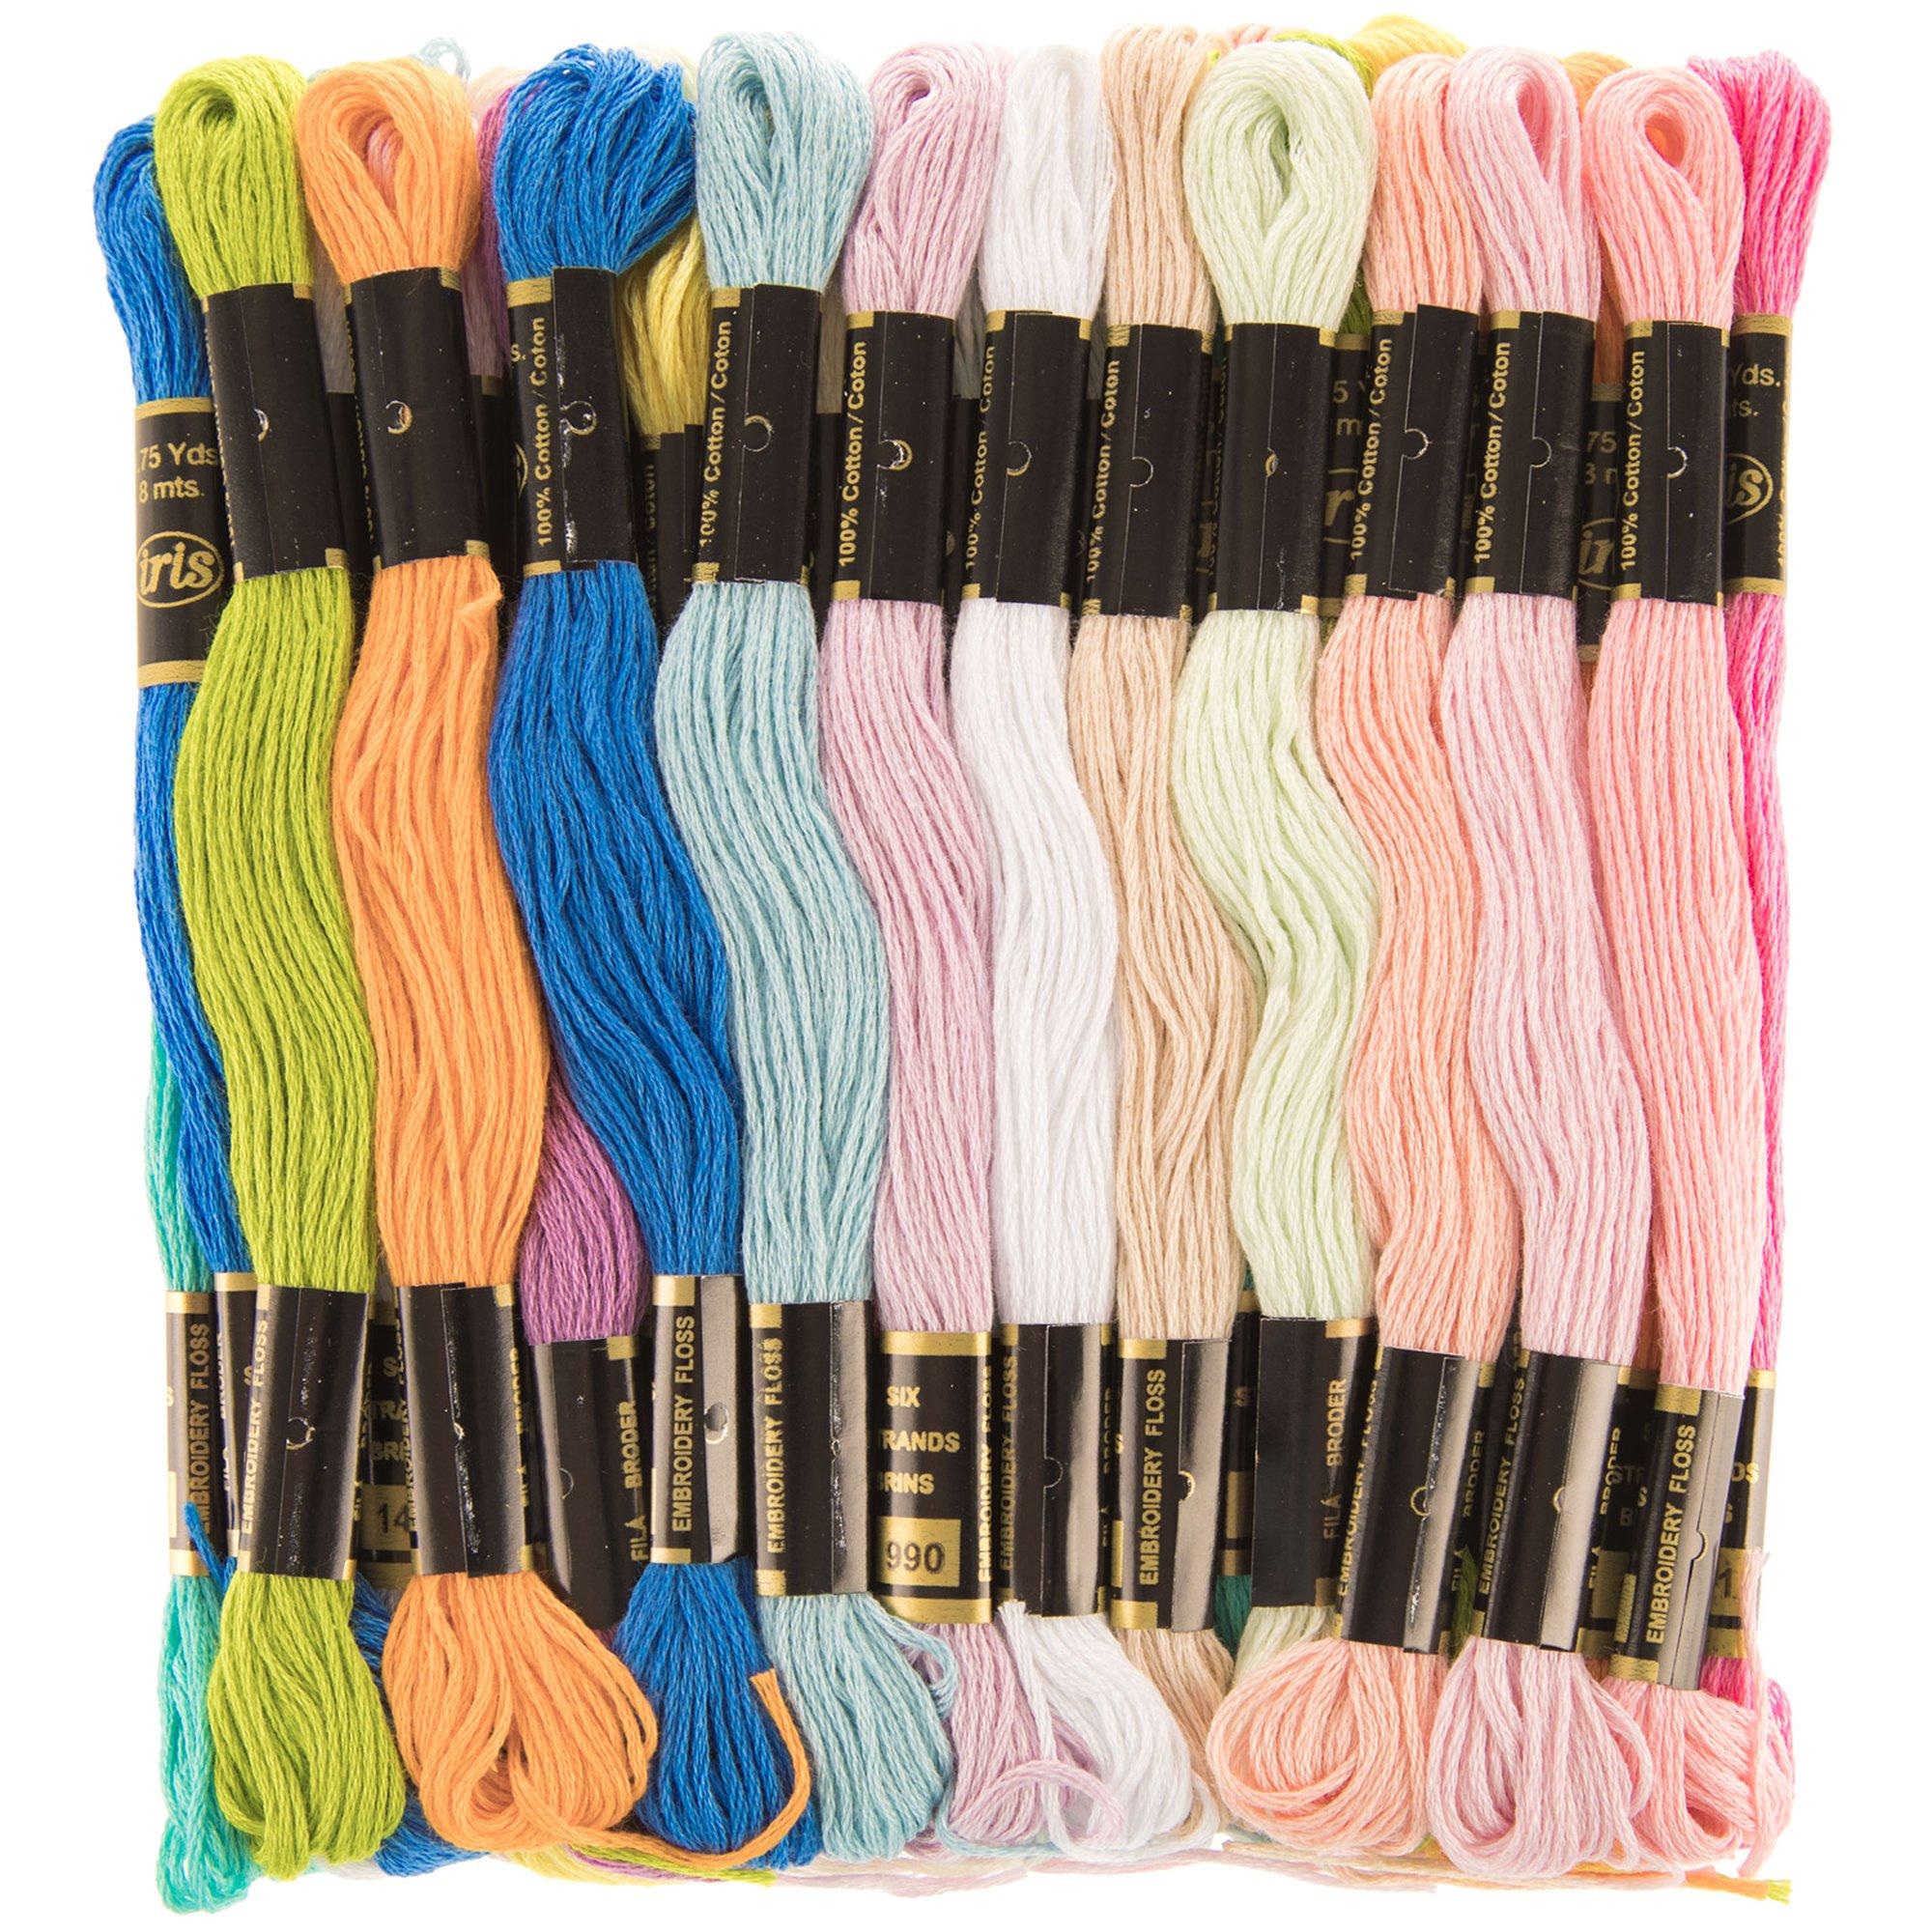 Embroidery Thread, Floss & Cotton